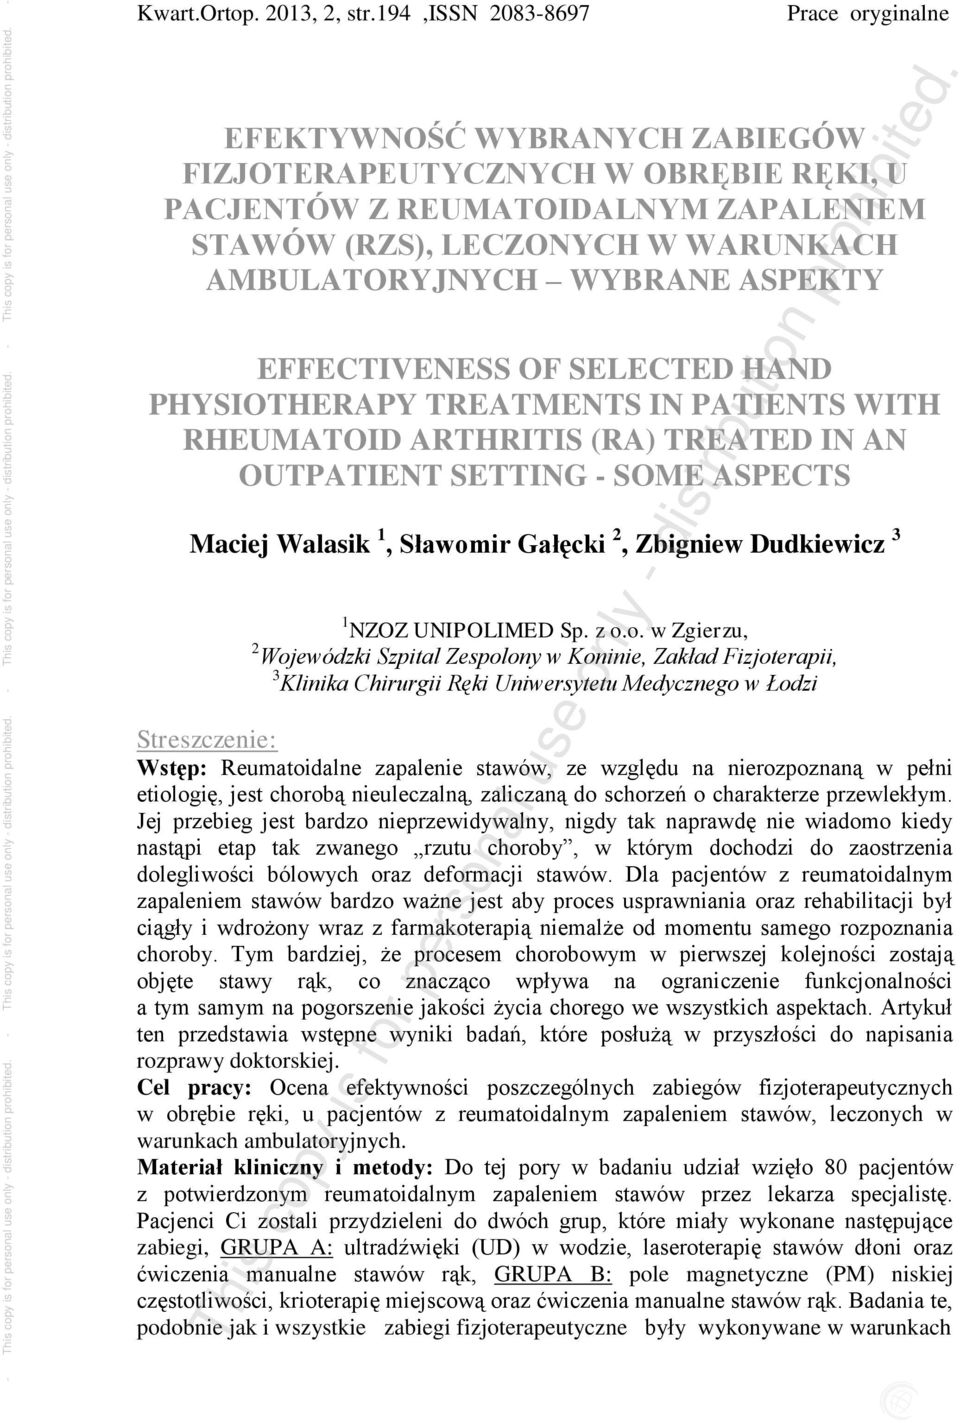 EFFECTIVENESS OF SELECTED HAND PHYSIOTHERAPY TREATMENTS IN PATIENTS WITH RHEUMATOID ARTHRITIS (RA) TREATED IN AN OUTPATIENT SETTING - SOME ASPECTS Maciej Walasik 1, Sławomir Gałęcki 2, Zbigniew